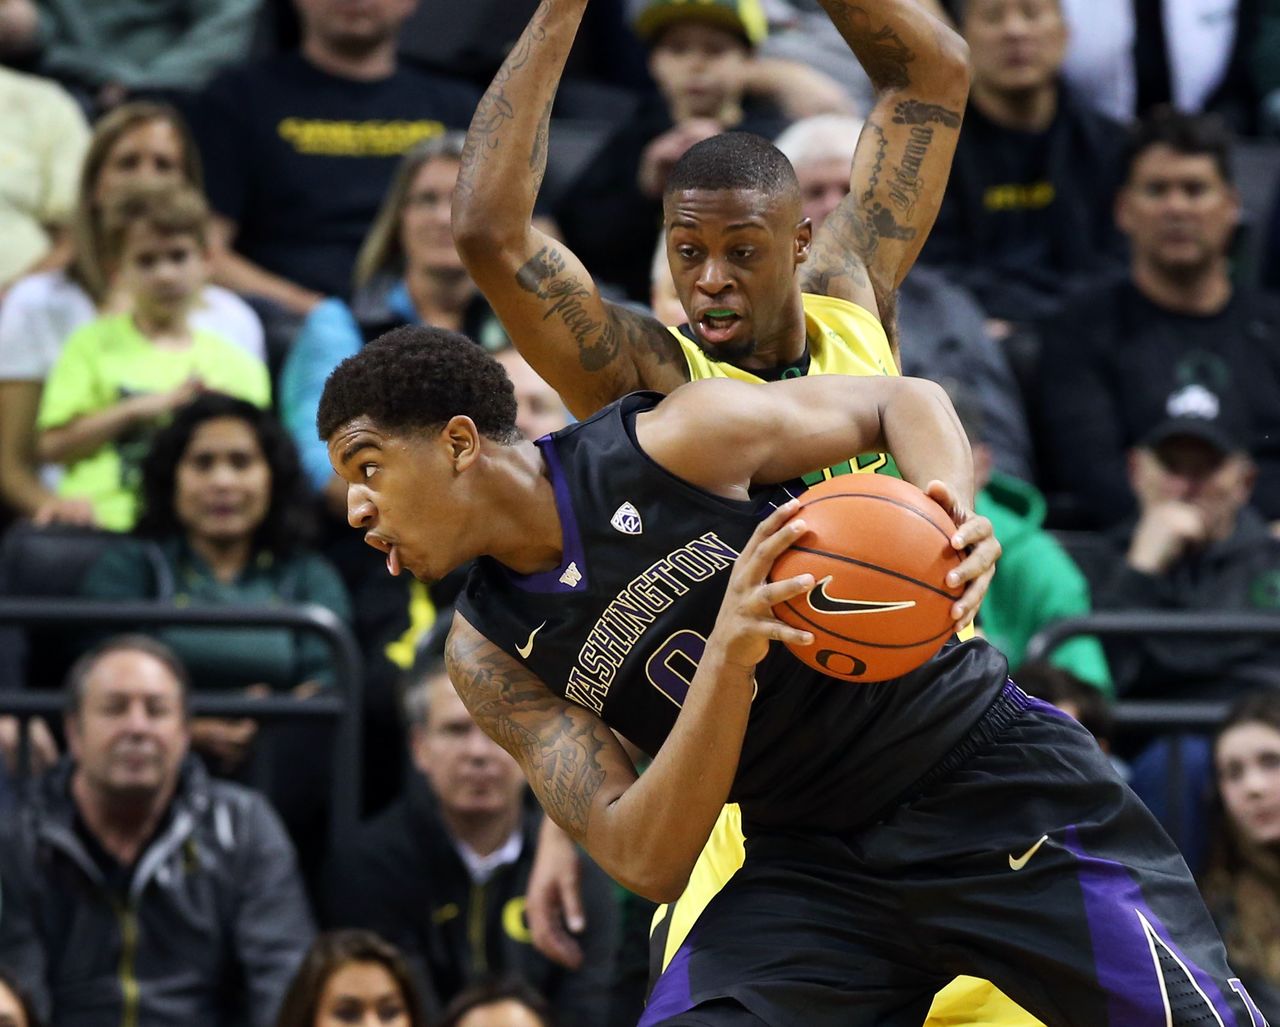 Washington’s Marquese Chriss (foreground) battles Oregon’s Elgin Cook for position under the basket during the first half of a game Sunday in Eugene, Ore.